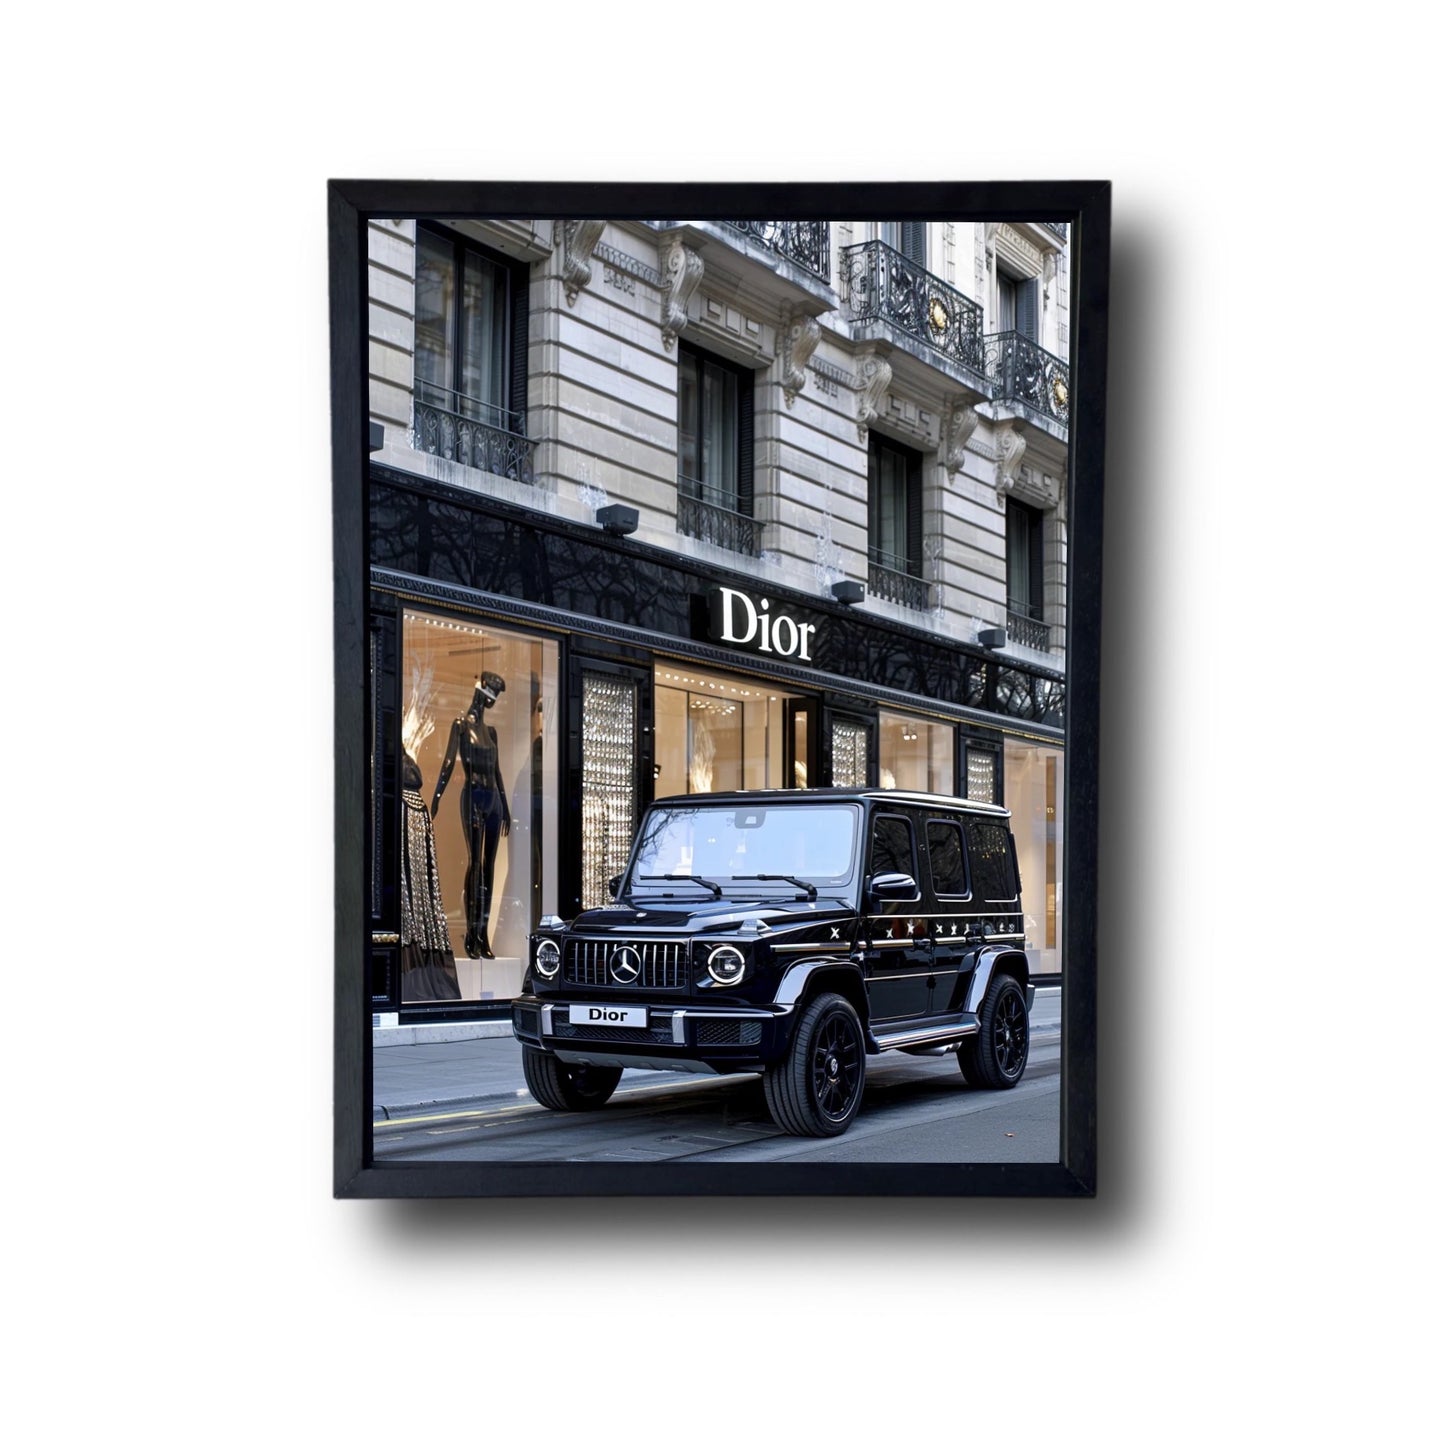 G Wagon Front of Gucci Store 3.0